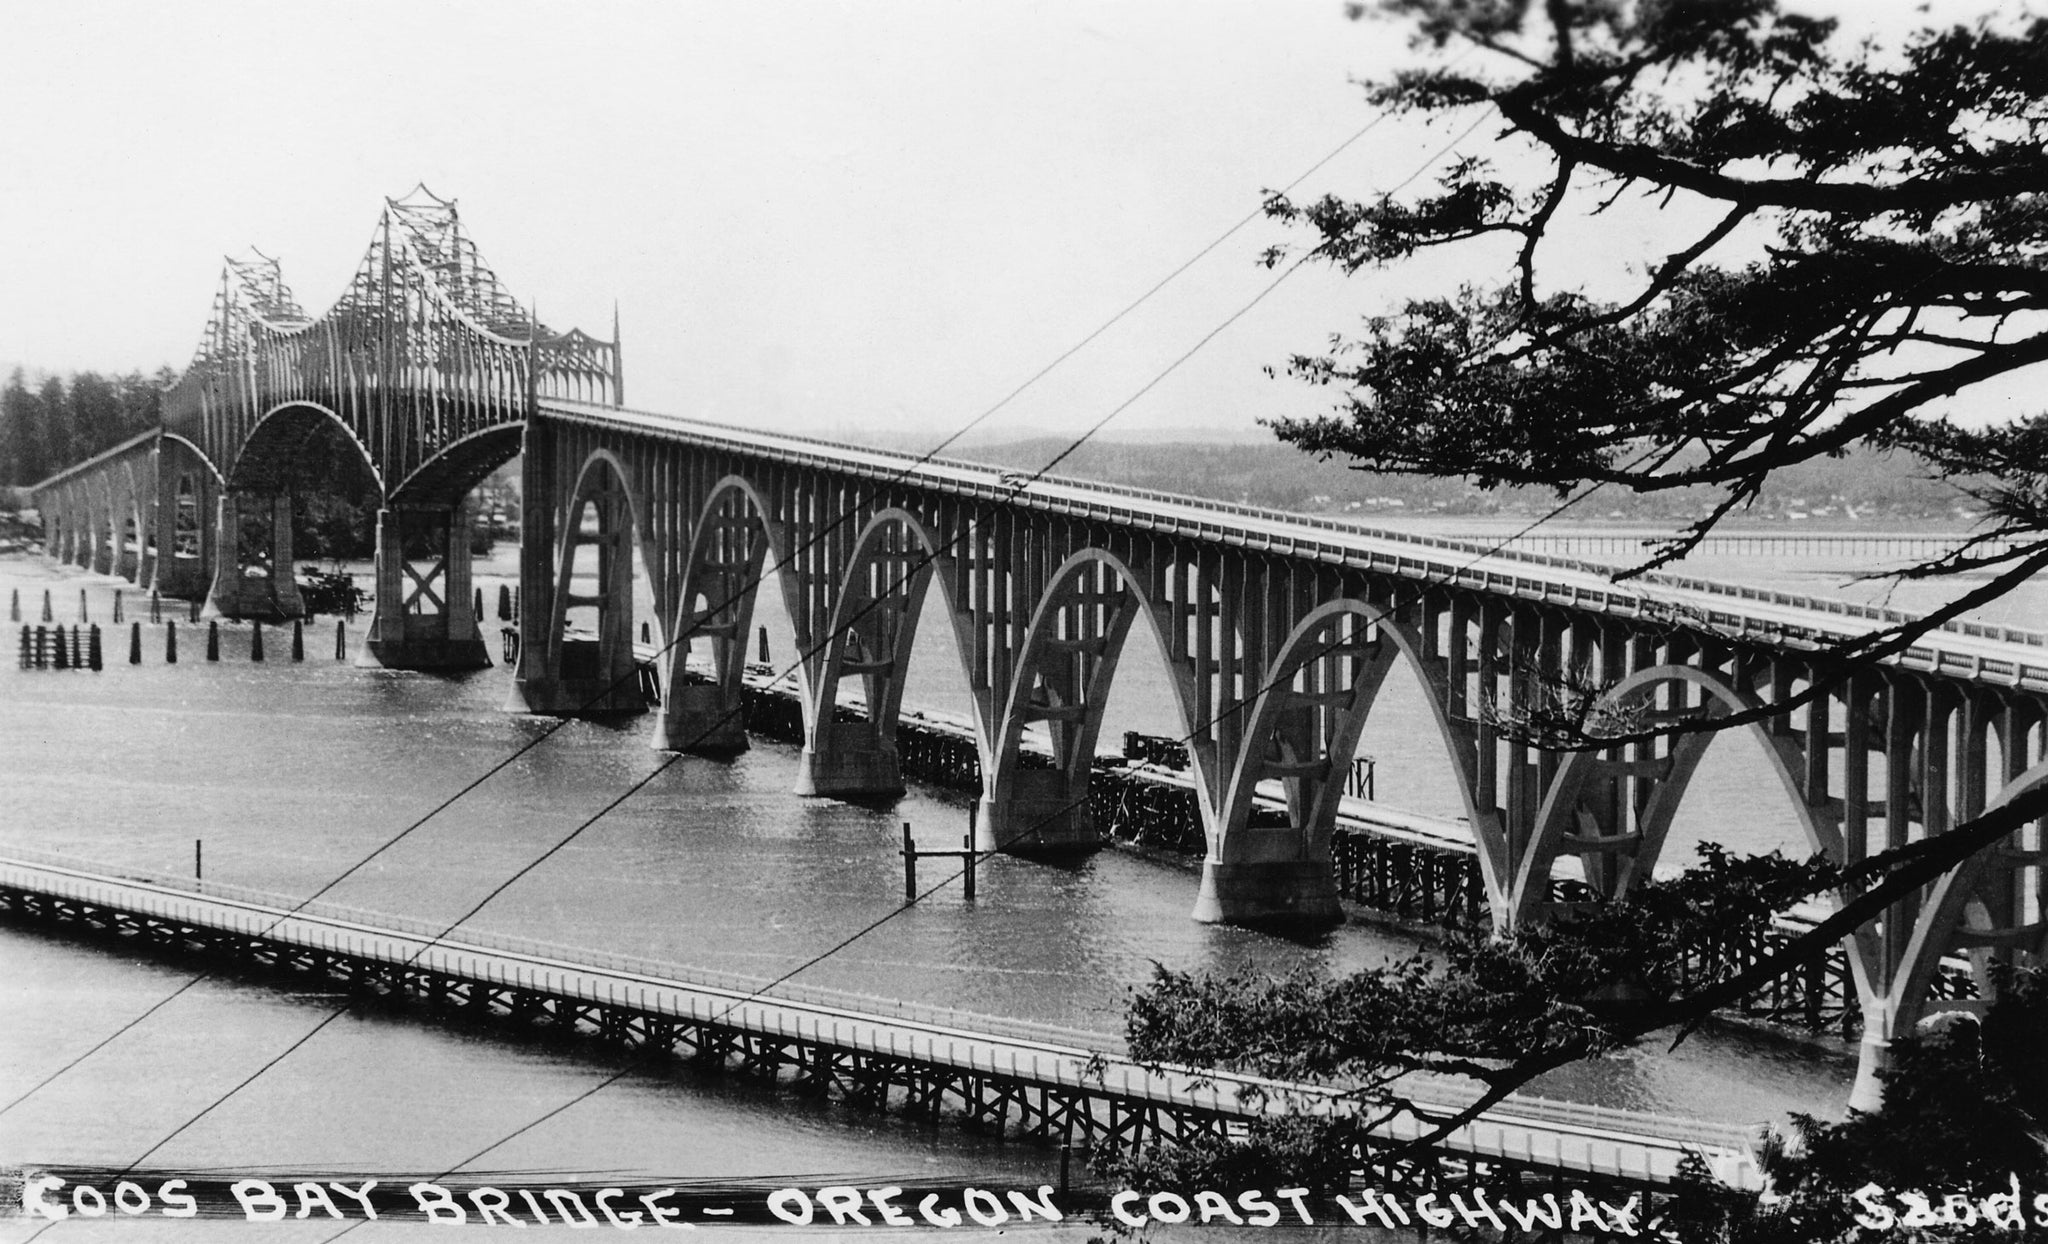 These photos of the completed Coos Bay Bridge in North Bend were both taken from un-mailed and undated postcards from the archives of the Coos History Museum. The photos likely date sometime shortly after completion of the span in 1936. The bridge, extending U.S. Route 101 through North Bend, was renamed the Conde B. McCullough Memorial Bridge in 1947 for its designer. The project was funded largely by the Depression-era Public Works Administration. The bridge was placed on the National Register of Historic Places in 2005. -- COOS HISTORY MUSEUM & MARITIME COLLECTION / 986-14.2